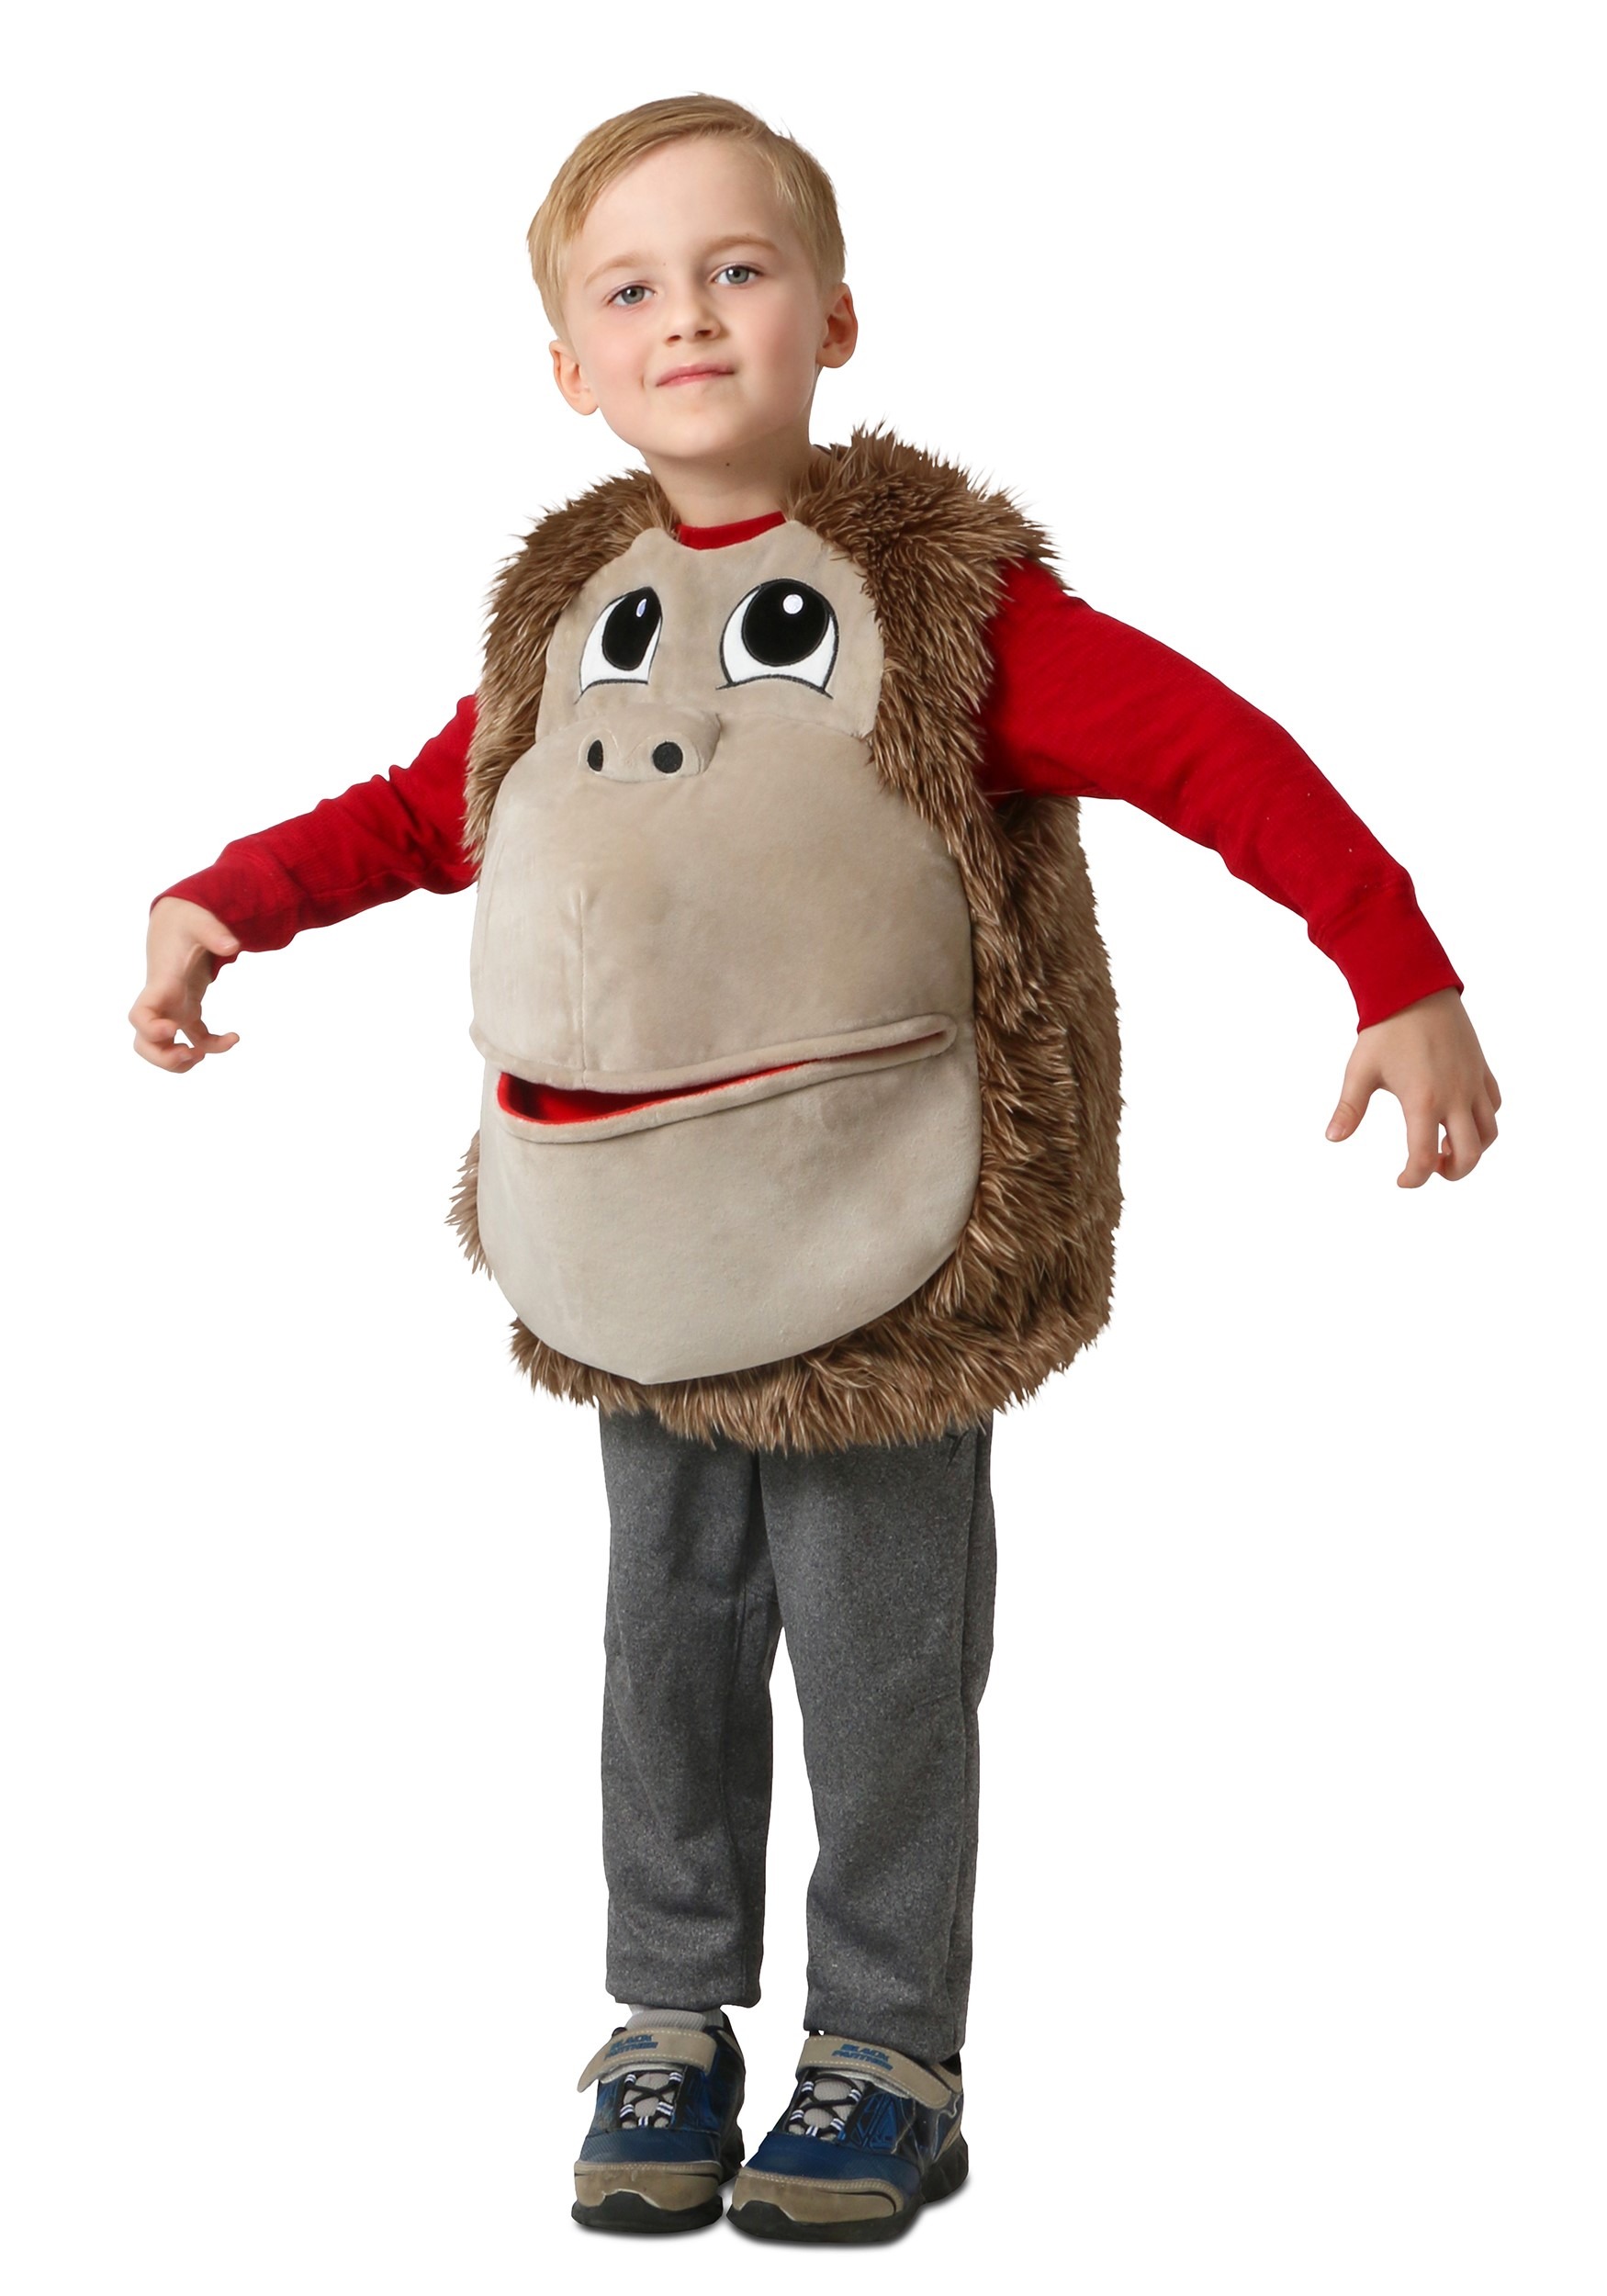 Feed Me Gorilla Costume For Kids